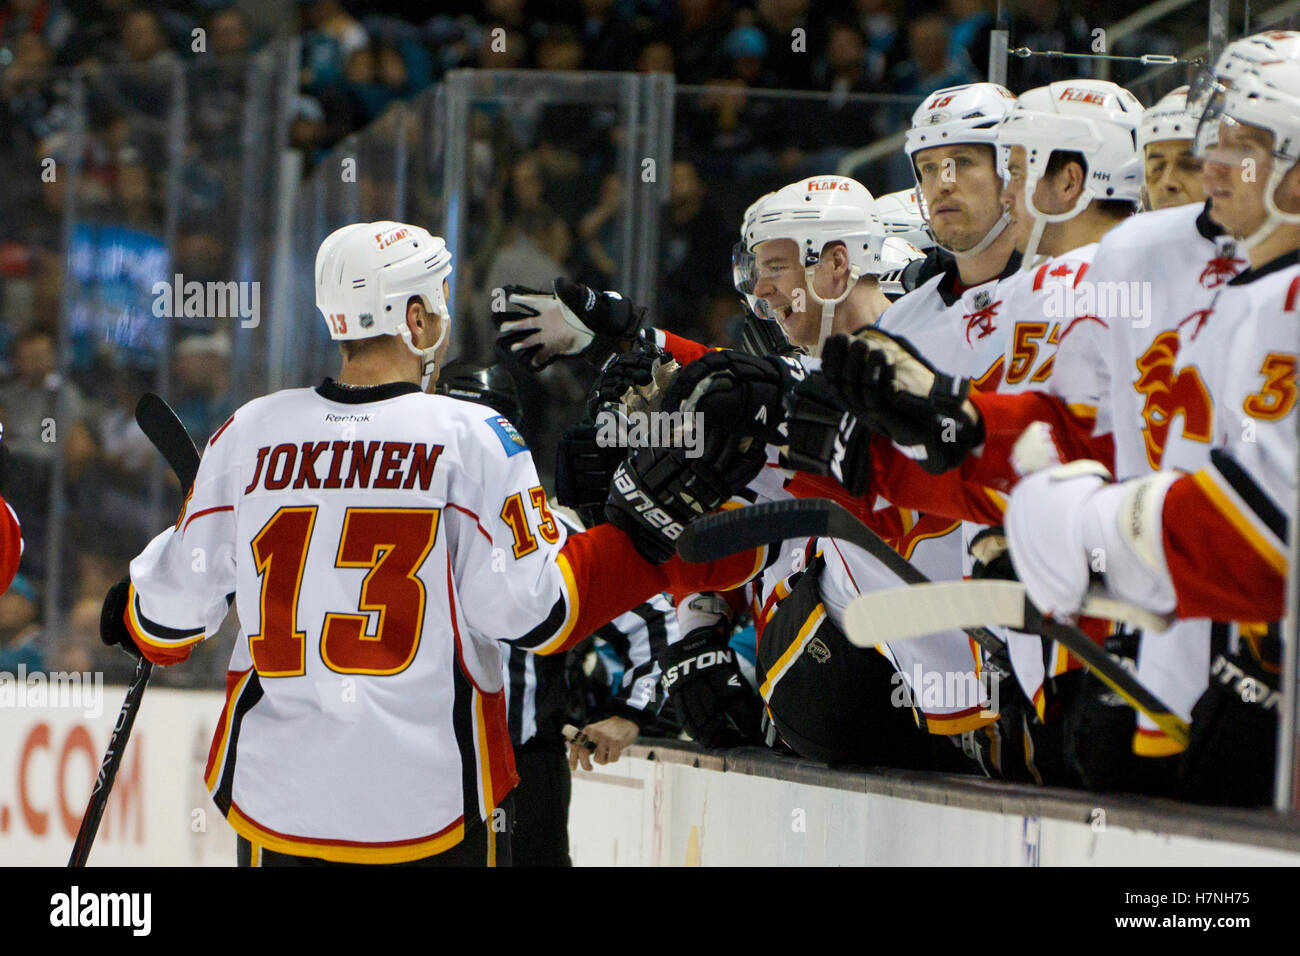 Feb 8, 2012; San Jose, CA, USA; Calgary Flames center Olli Jokinen (13) is congratulated by teammates after scoring a goal against the San Jose Sharks during the second period at HP Pavilion. Stock Photo